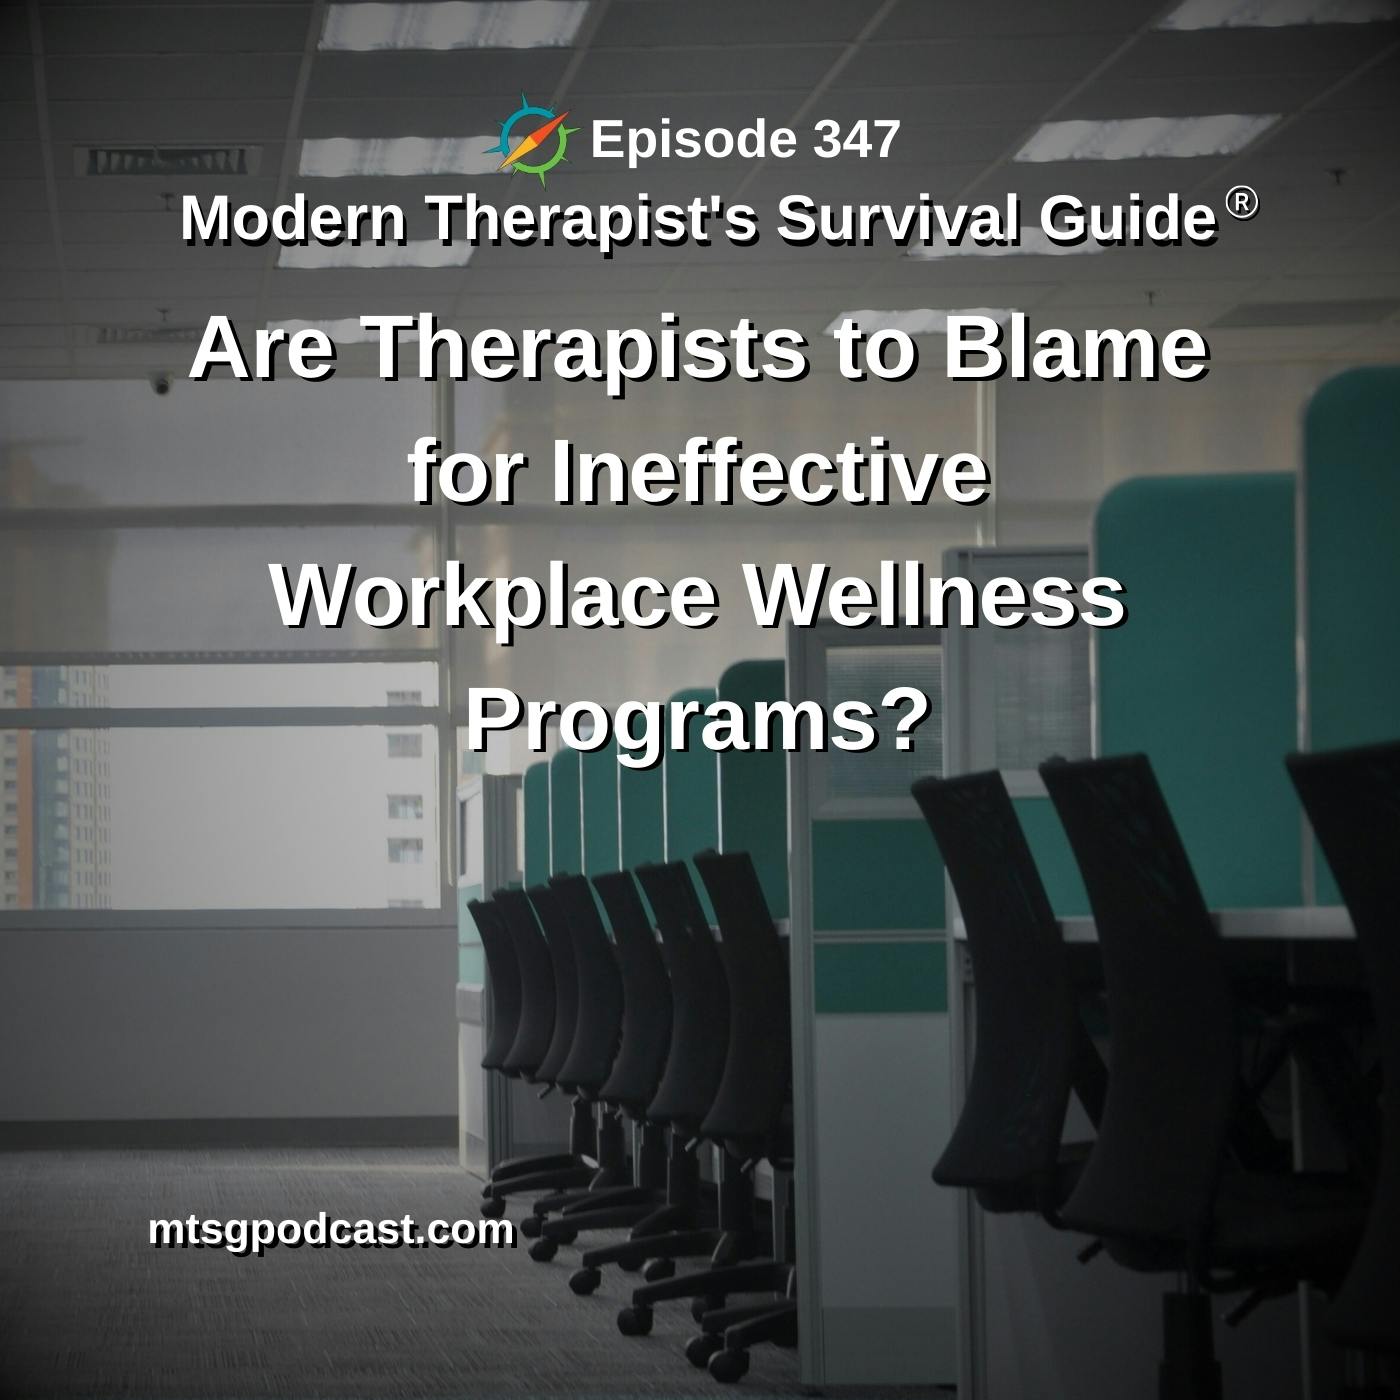 Are Therapists to Blame for Ineffective Workplace Wellness Programs?